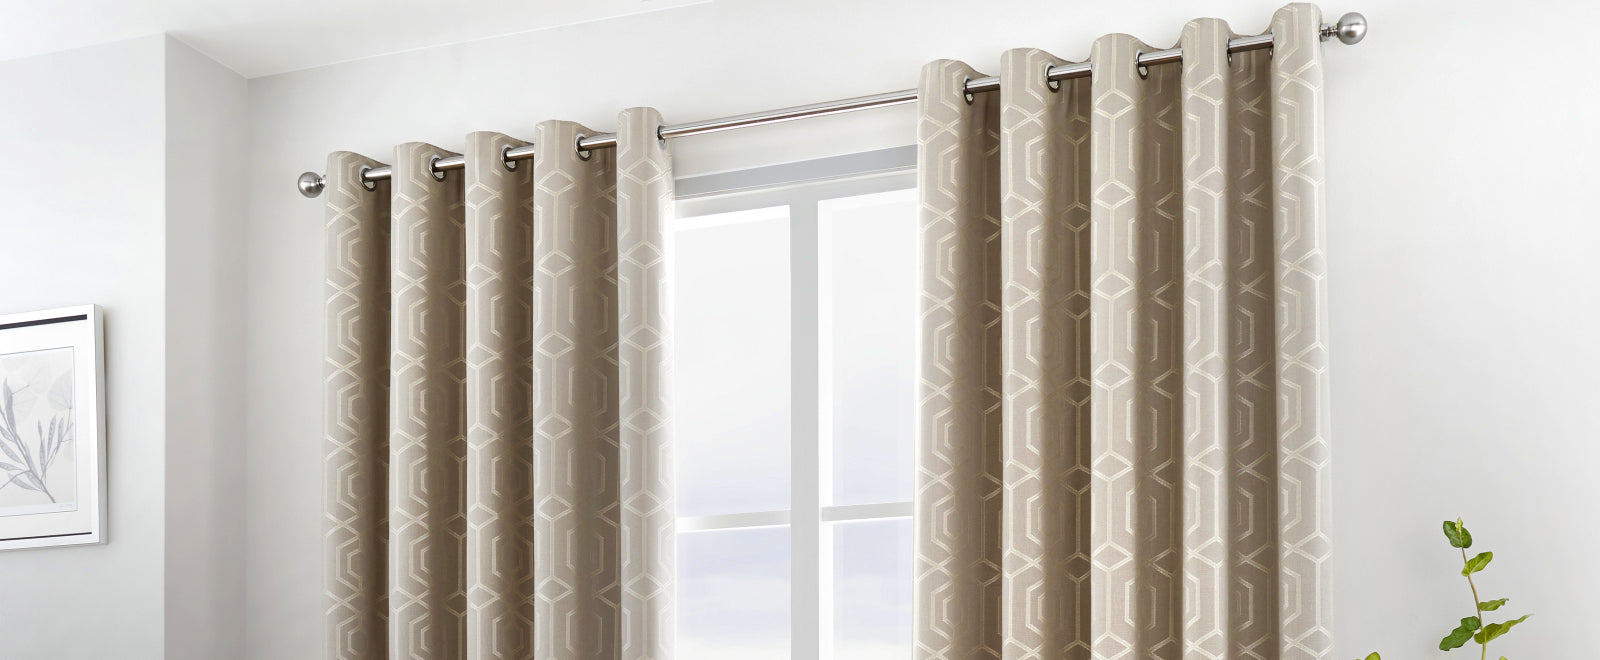 Camberwell - Eyelet Curtains in Stone by Curtina